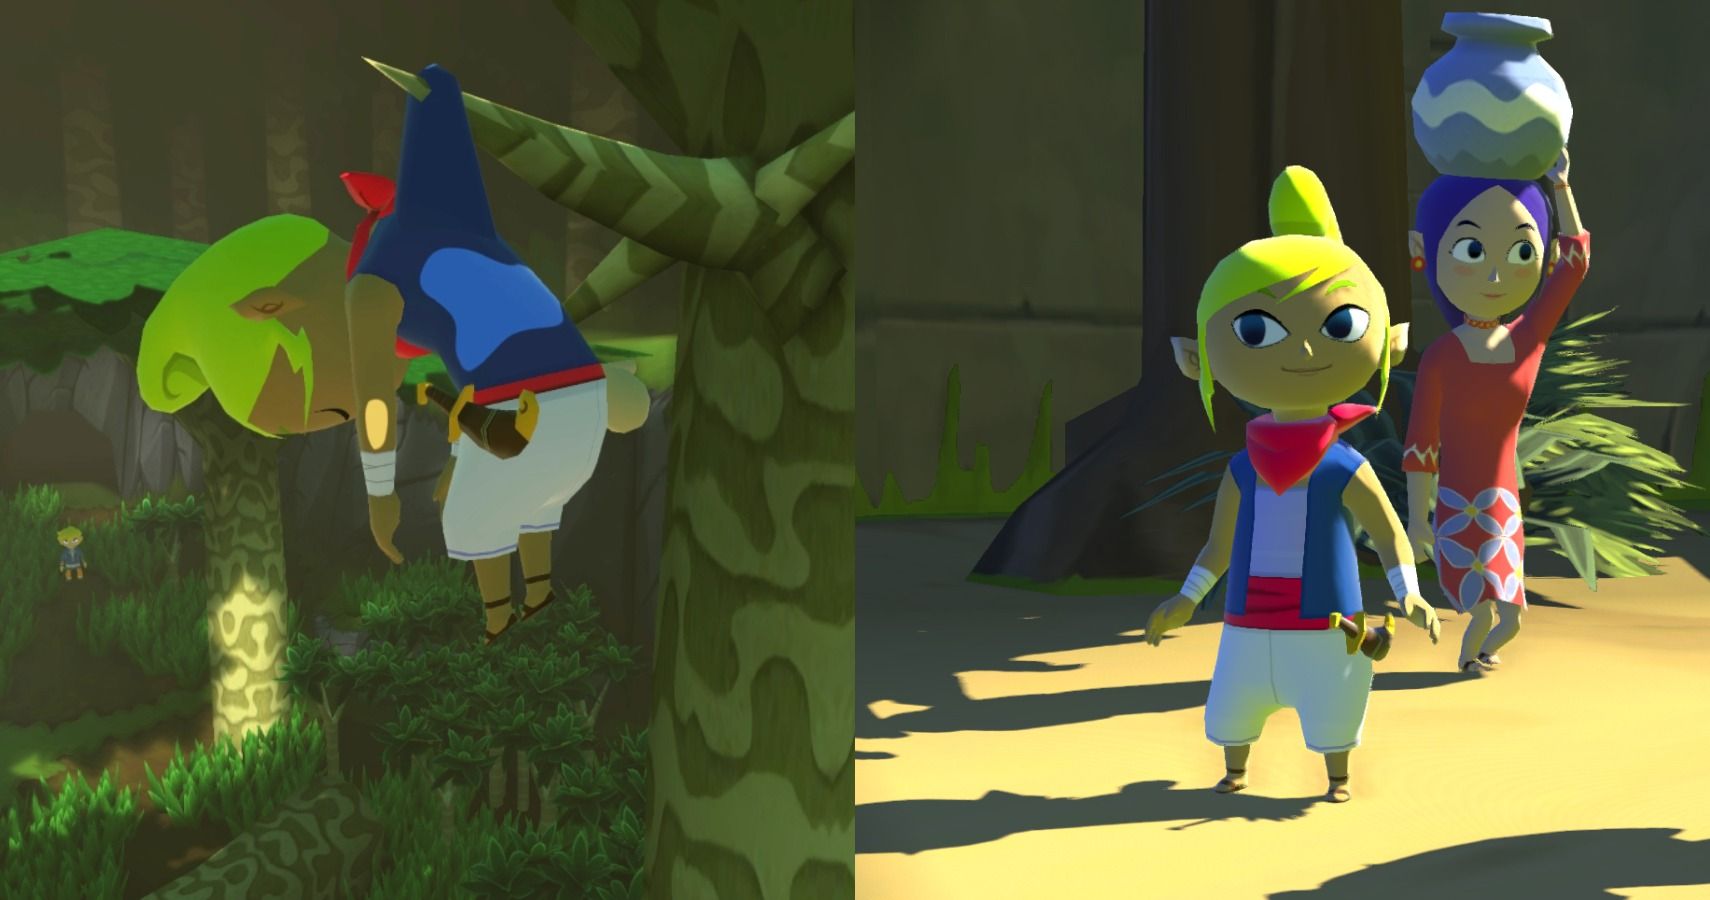 Tetra From The Legend of Zelda Wind Waker Needs Her Own Game